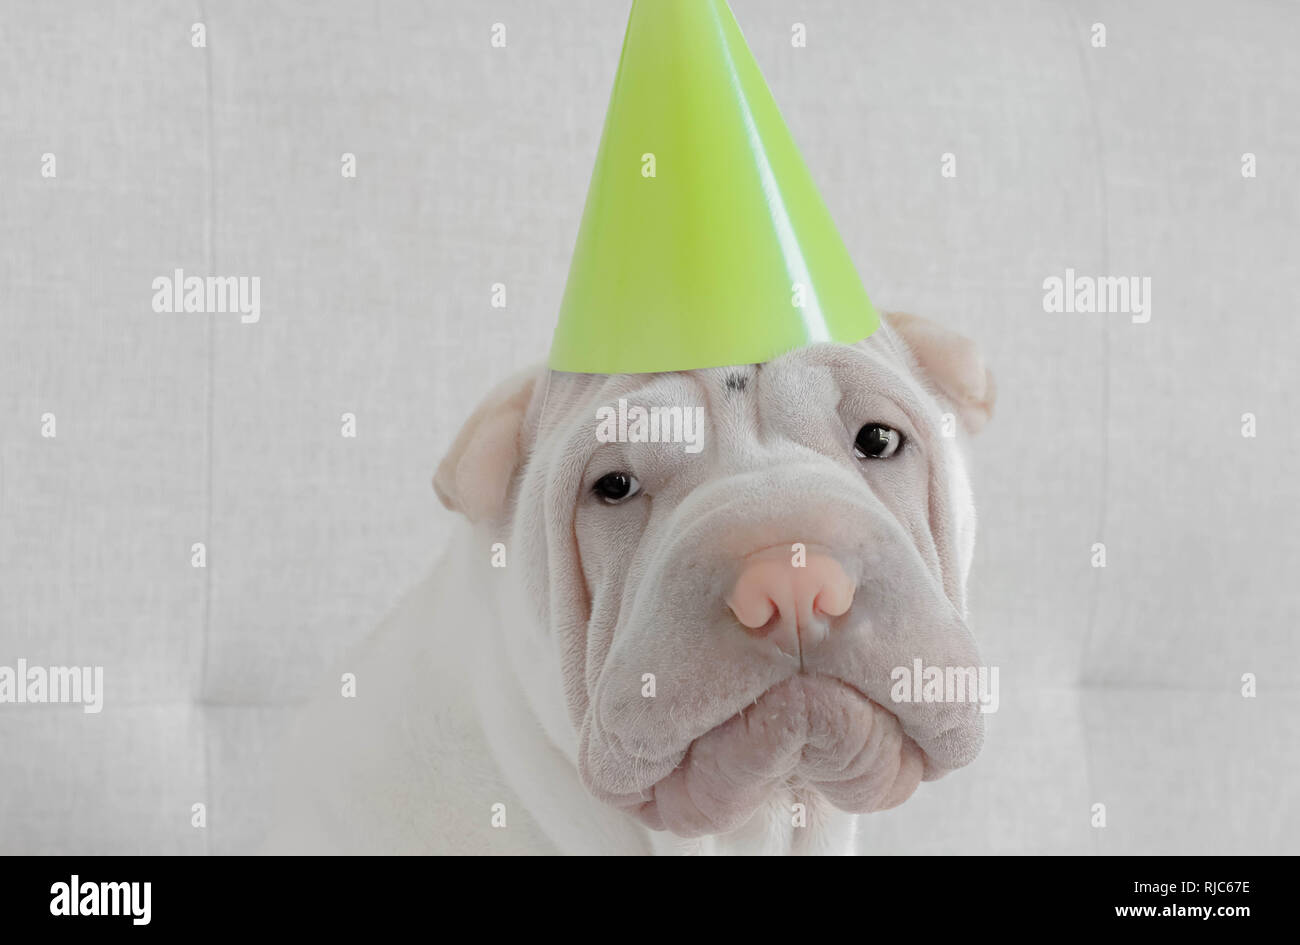 Shar pei puppy dog wearing a party hat Stock Photo